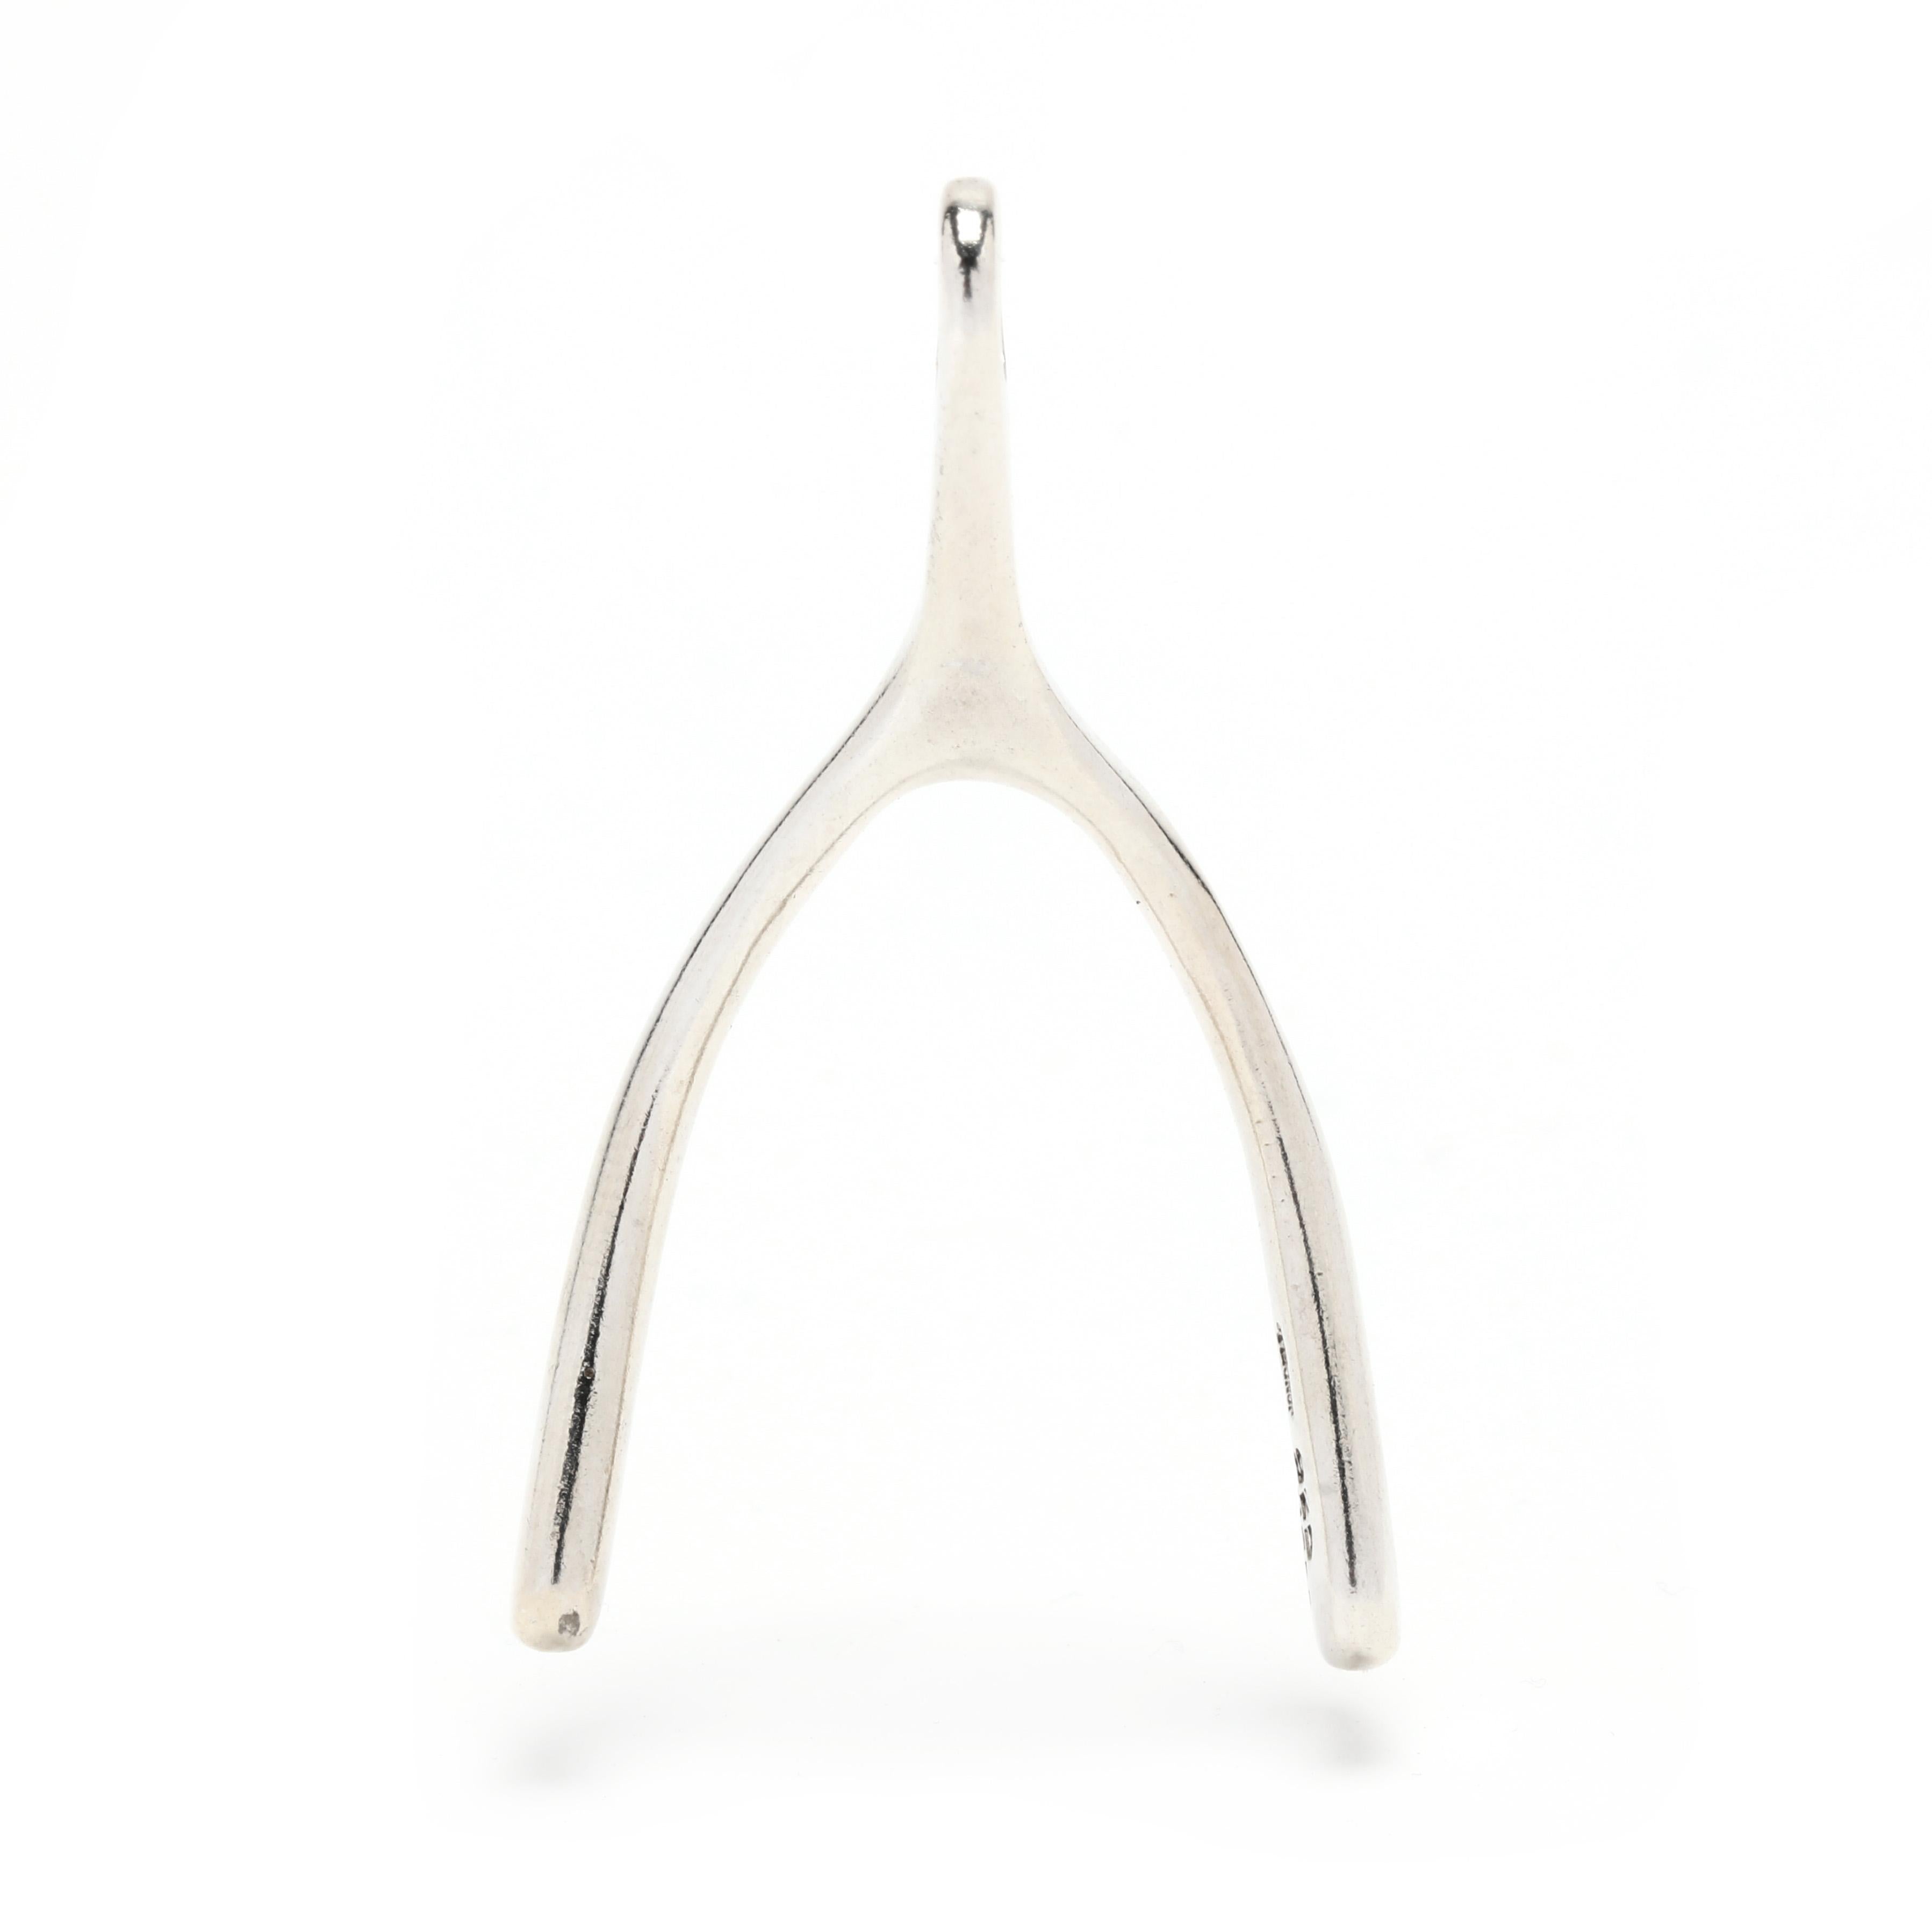 This exquisite Wish Bone pendant is the perfect addition to your jewelry collection. Crafted from sterling silver, the pendant measures 1 7/8 inches in length and features a delicate wish bone design. Handmade in Mexico, this piece of jewelry is